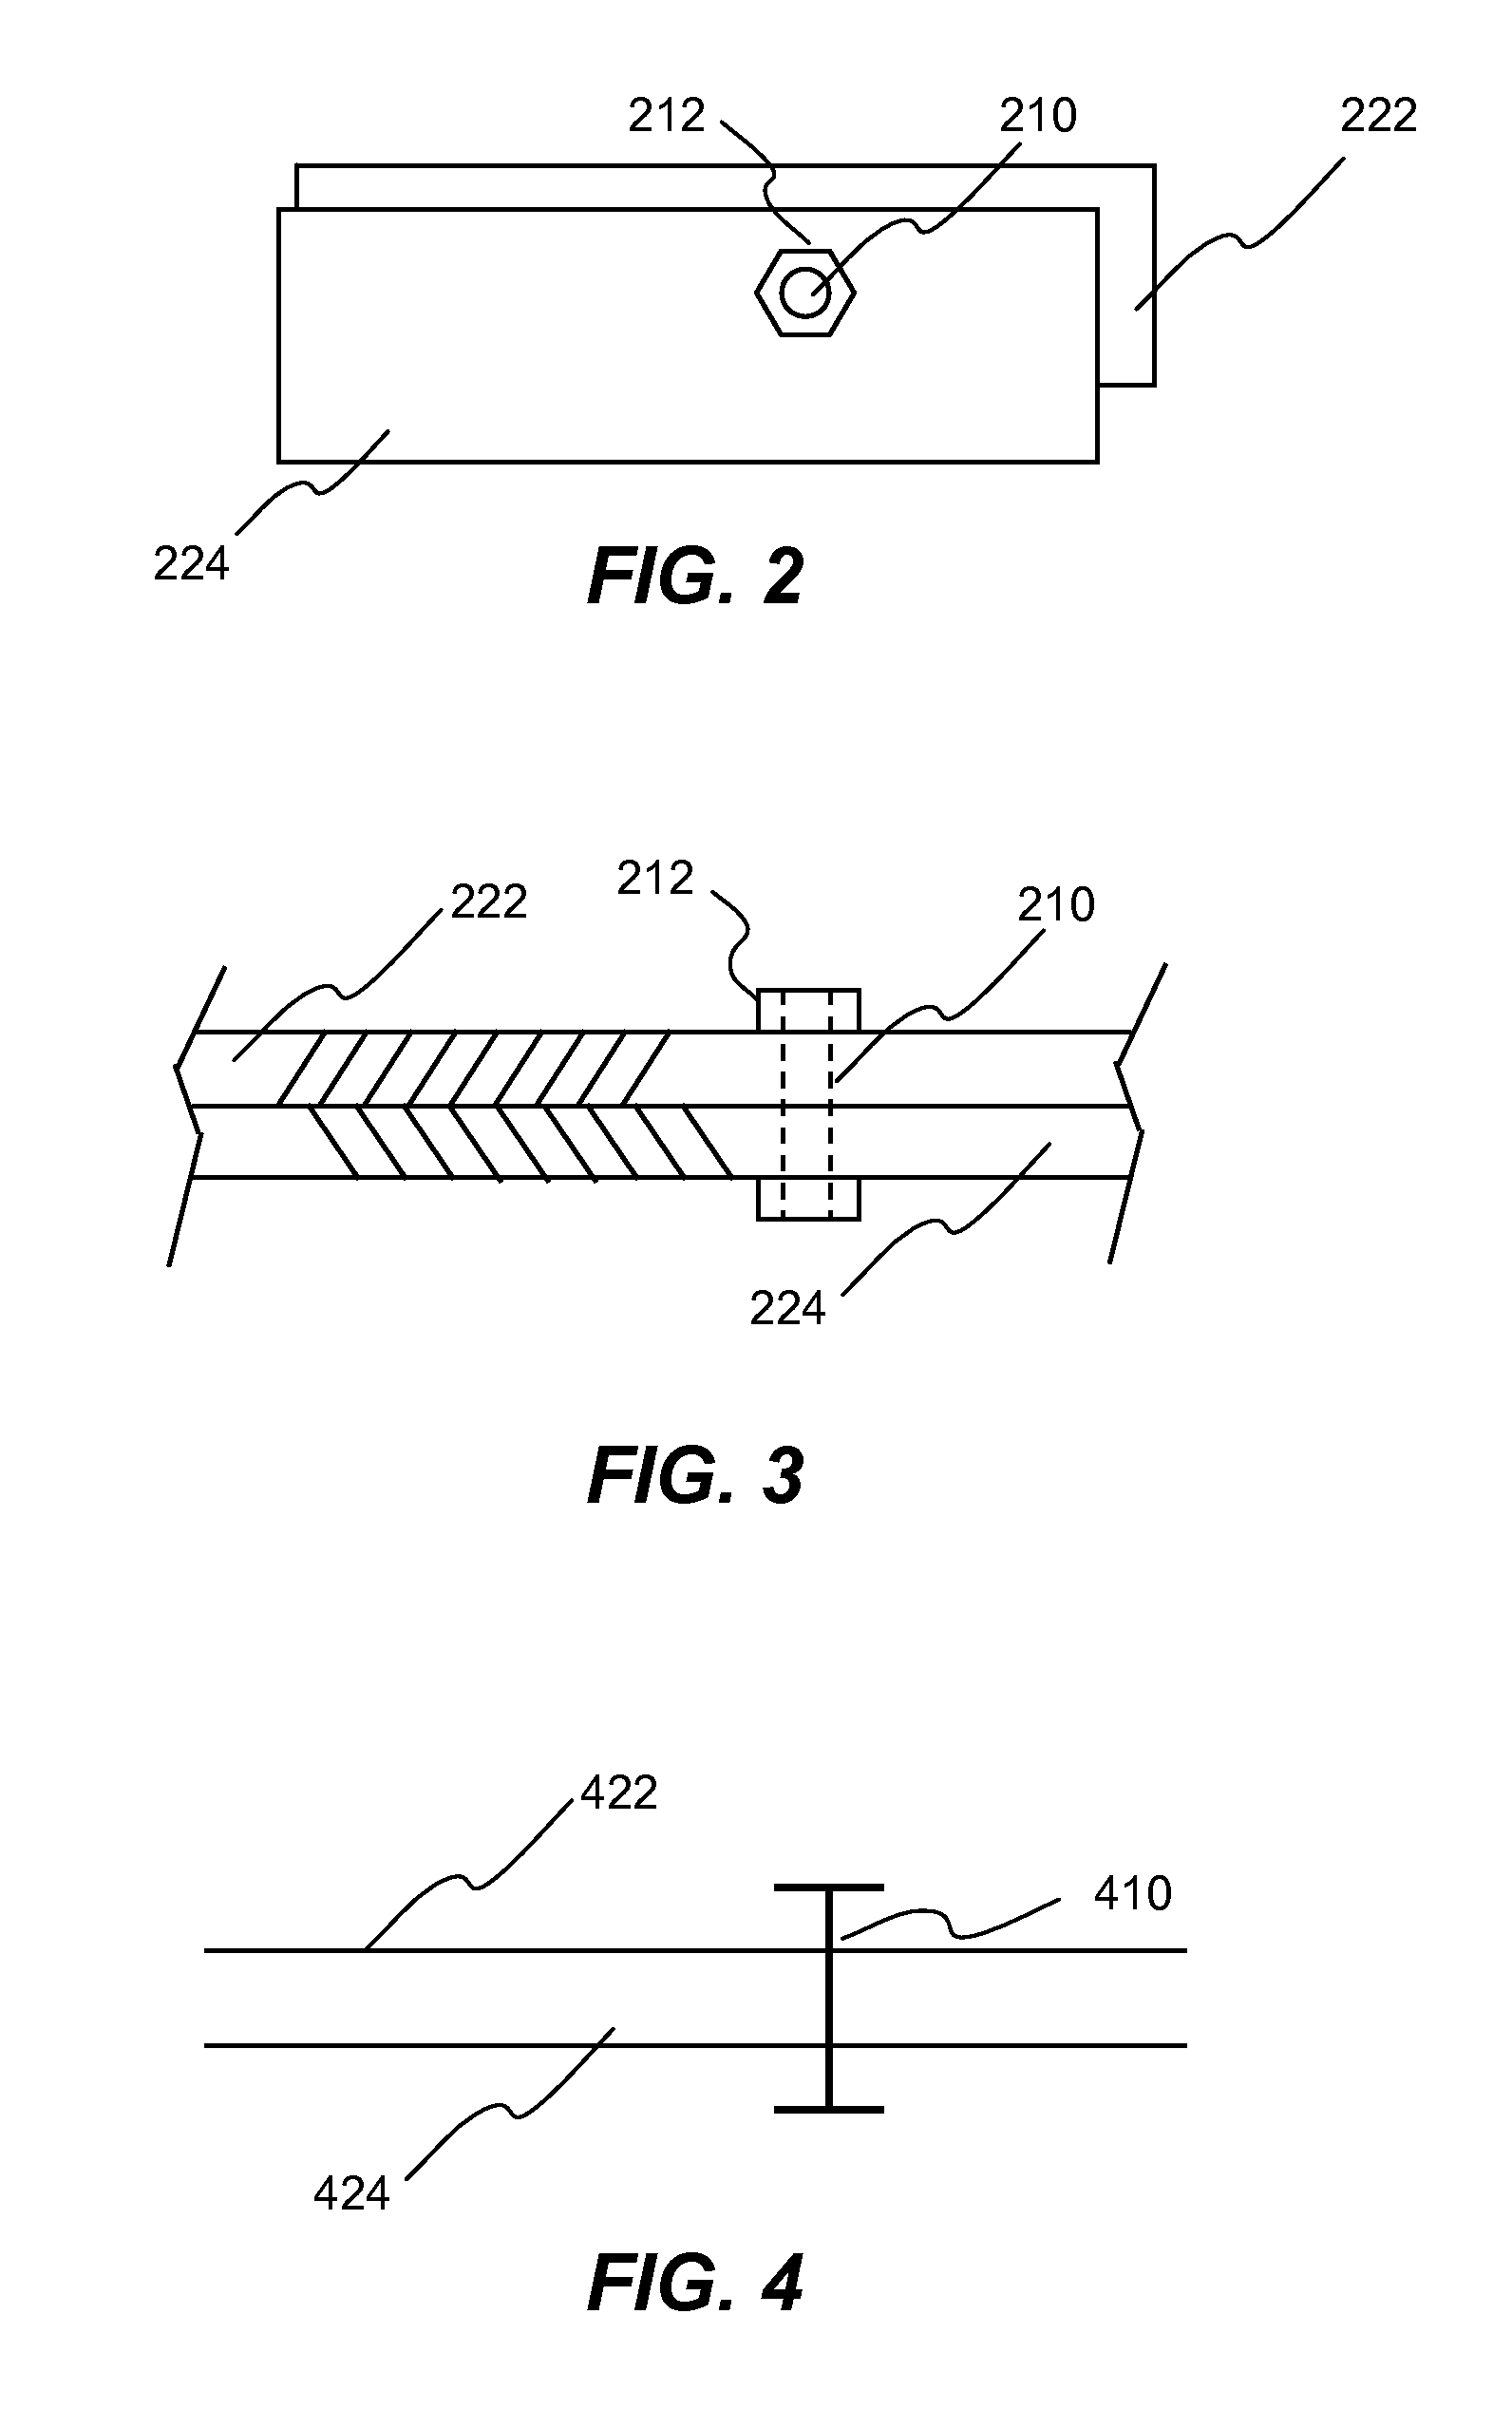 Method of initializing bolt pretension in a finite element analysis